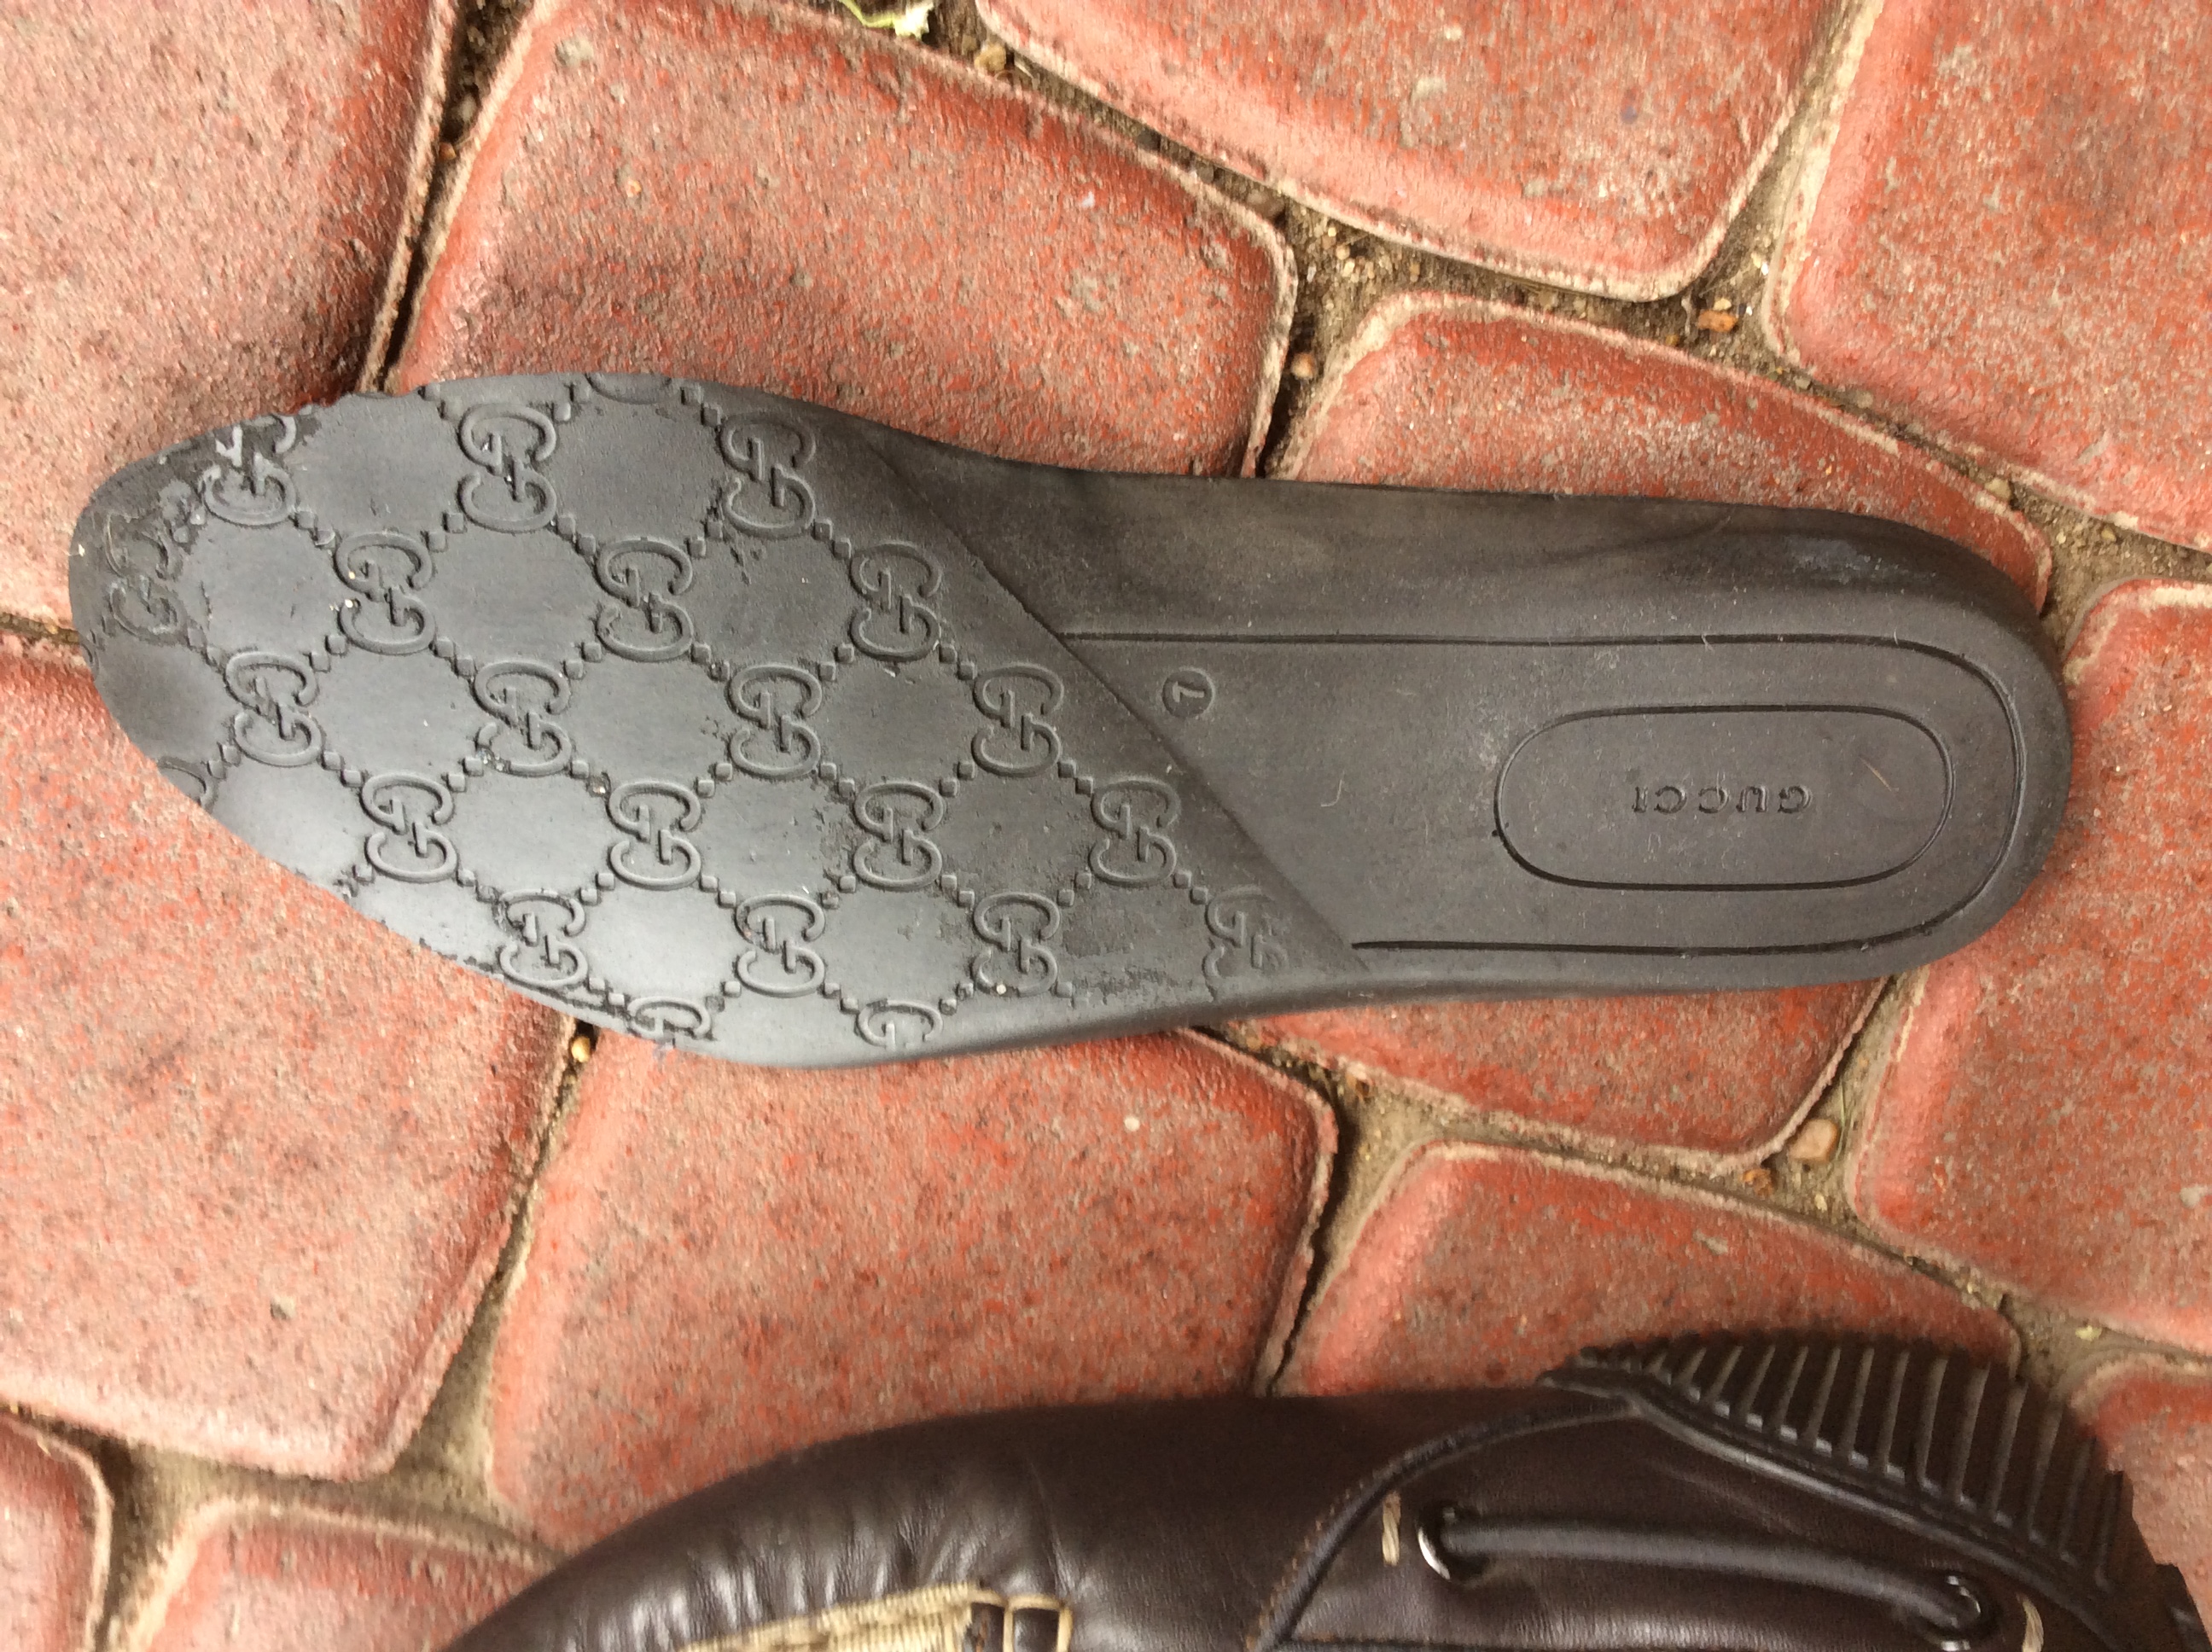 Scan klud Amorous Gucci loafers -real or fake, please help - The eBay Community